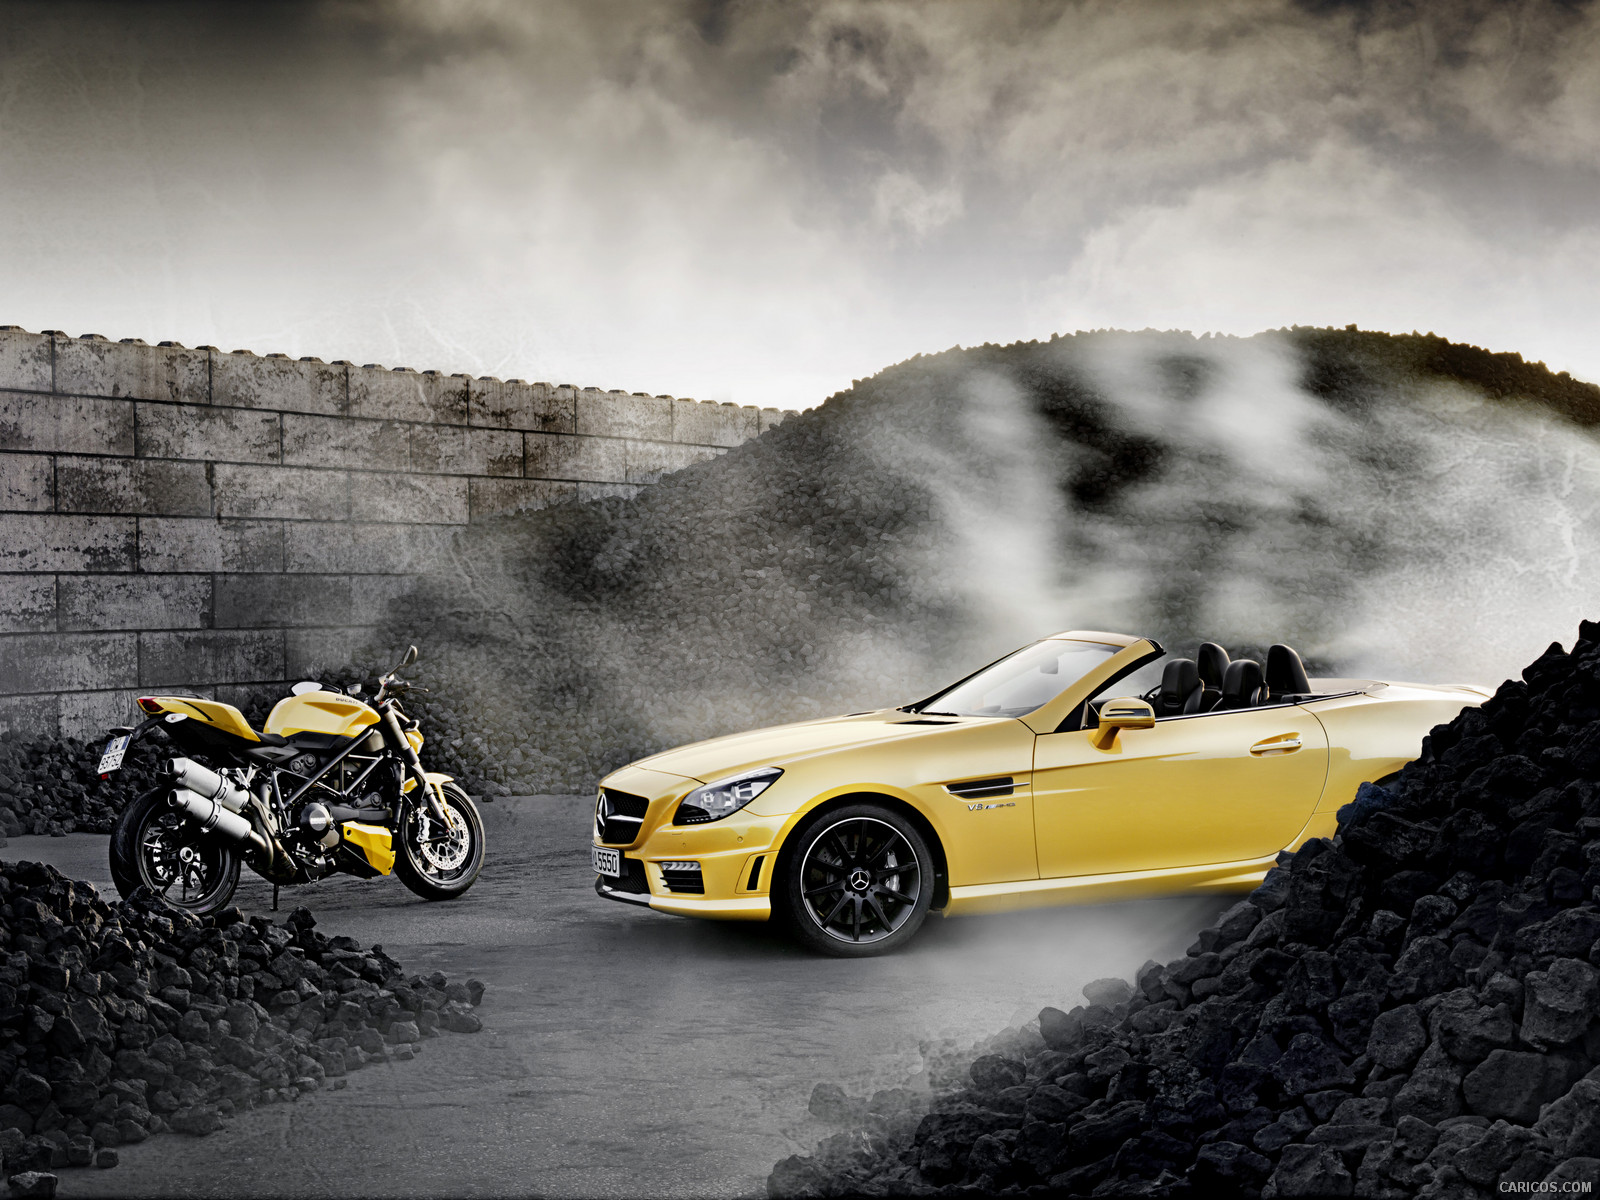 Mercedes-Benz SLK 55 AMG and Ducati Streetfighter 848 - , #42 of 47